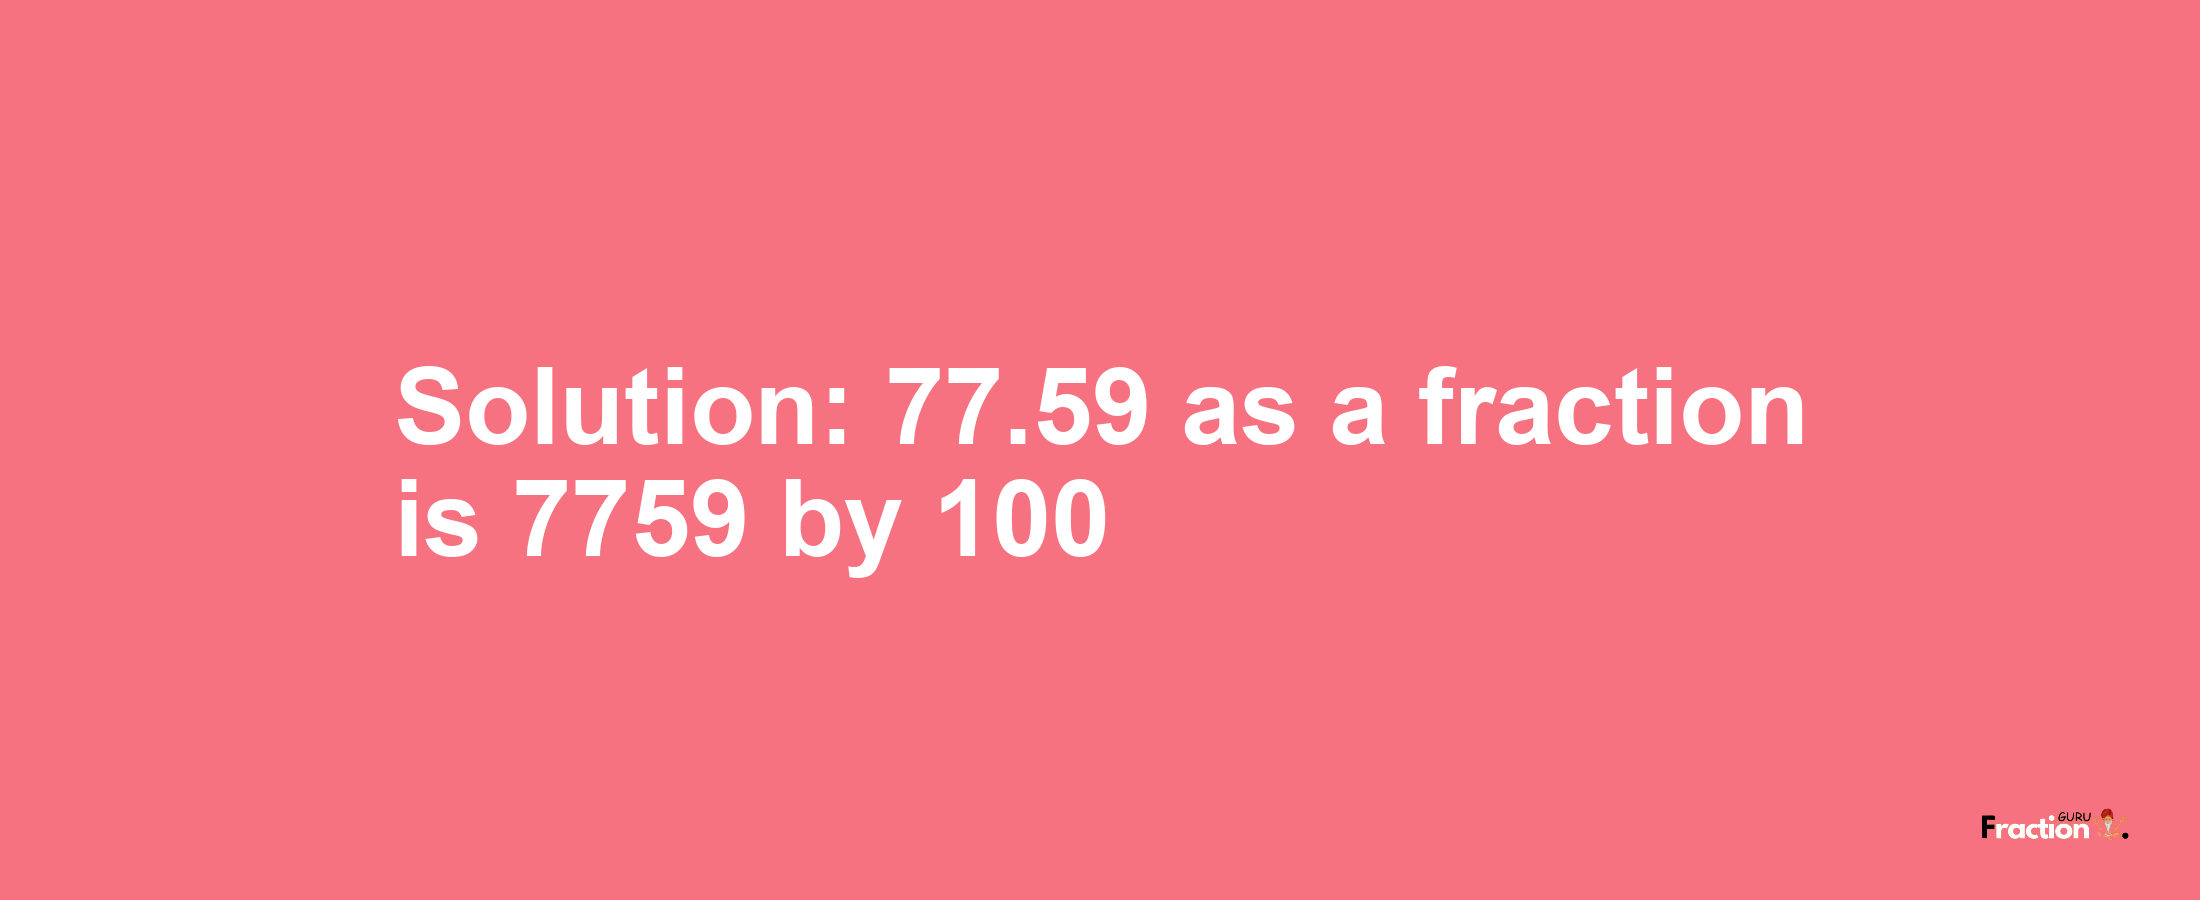 Solution:77.59 as a fraction is 7759/100